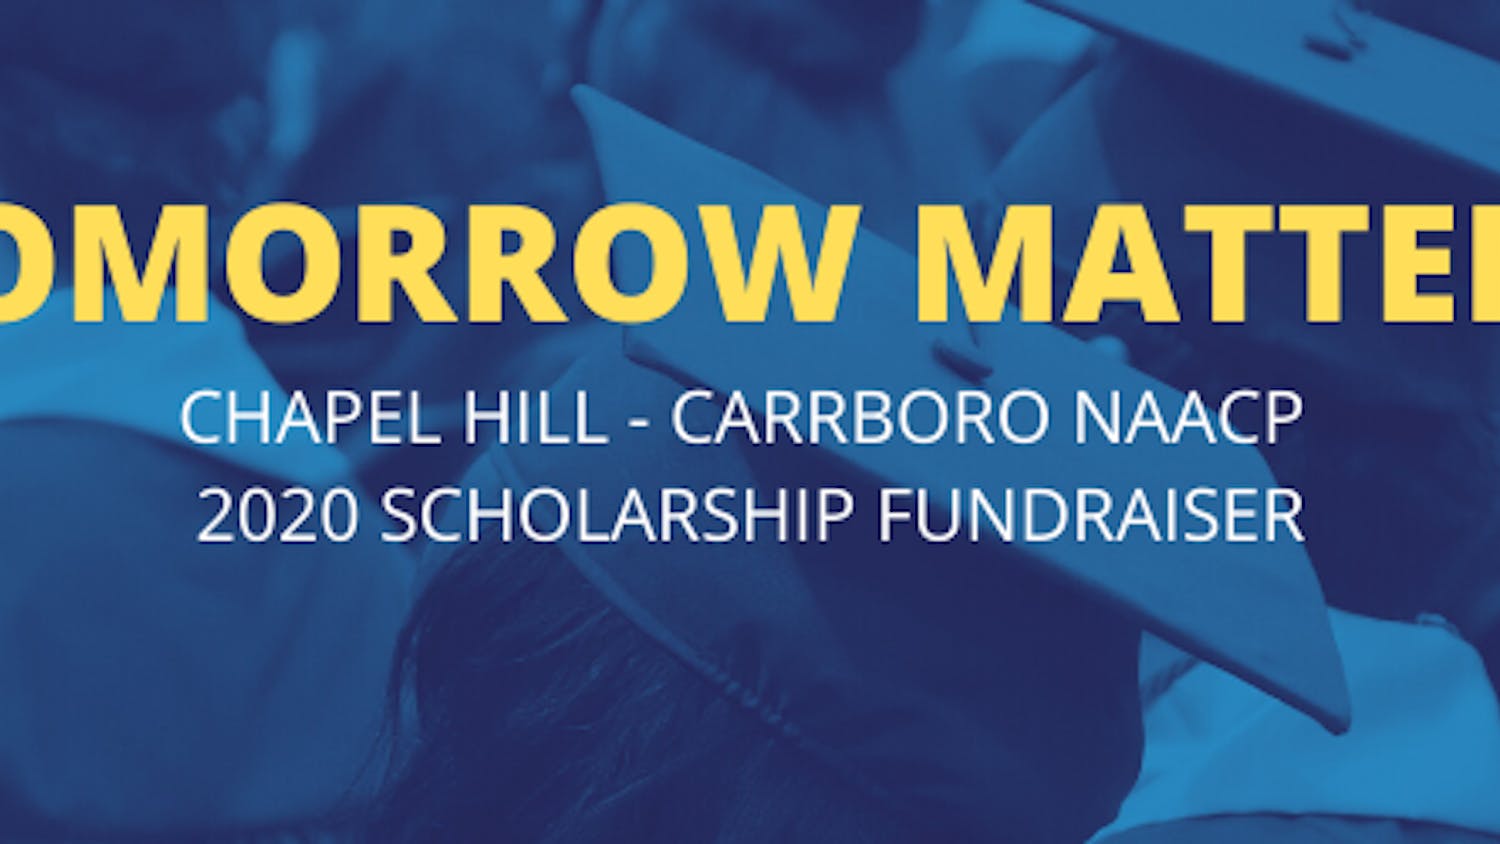 CHAPEL HILL - CARRBORO NAACP SCHOLARSHIP FUNDRAISER 2020.png